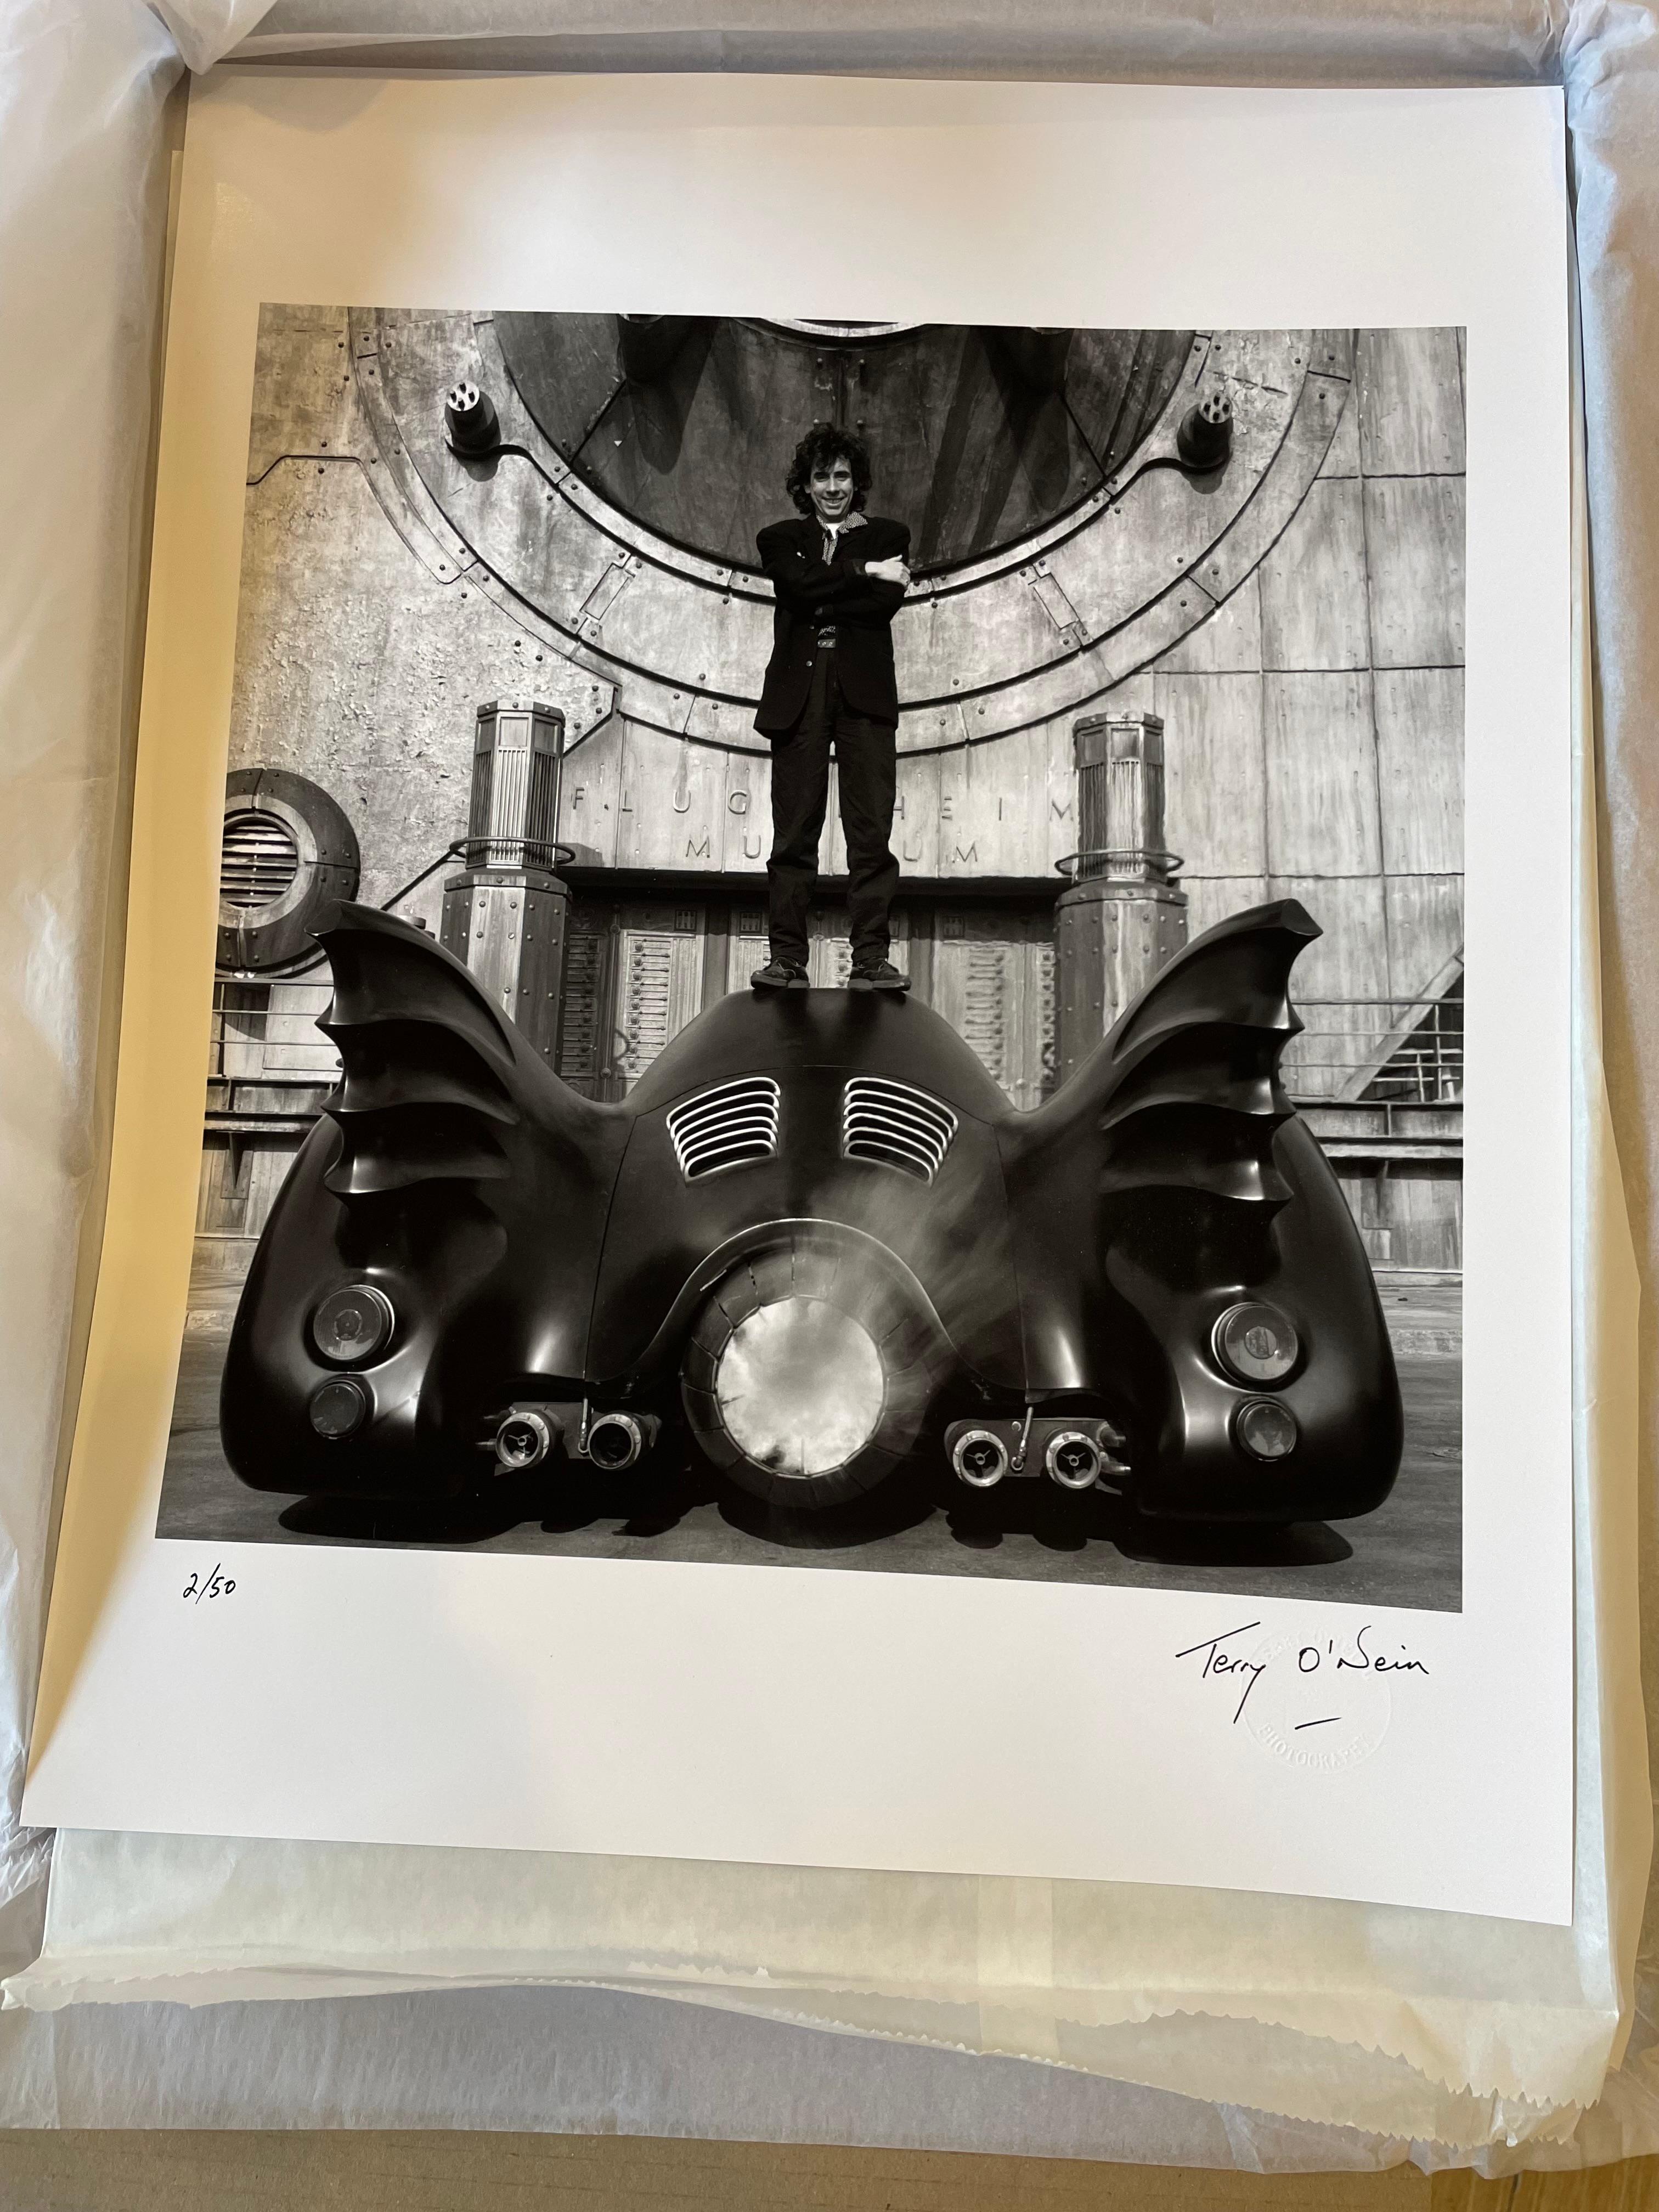 Available in other sizes.

Film director Tim Burton stands on top of the Batmobile at Pinewood Studios, Buckinghamshire during the filming of his 1989 production of ‘Batman’.

British photographer, Terry O’Neill, has photographed presidents, prime